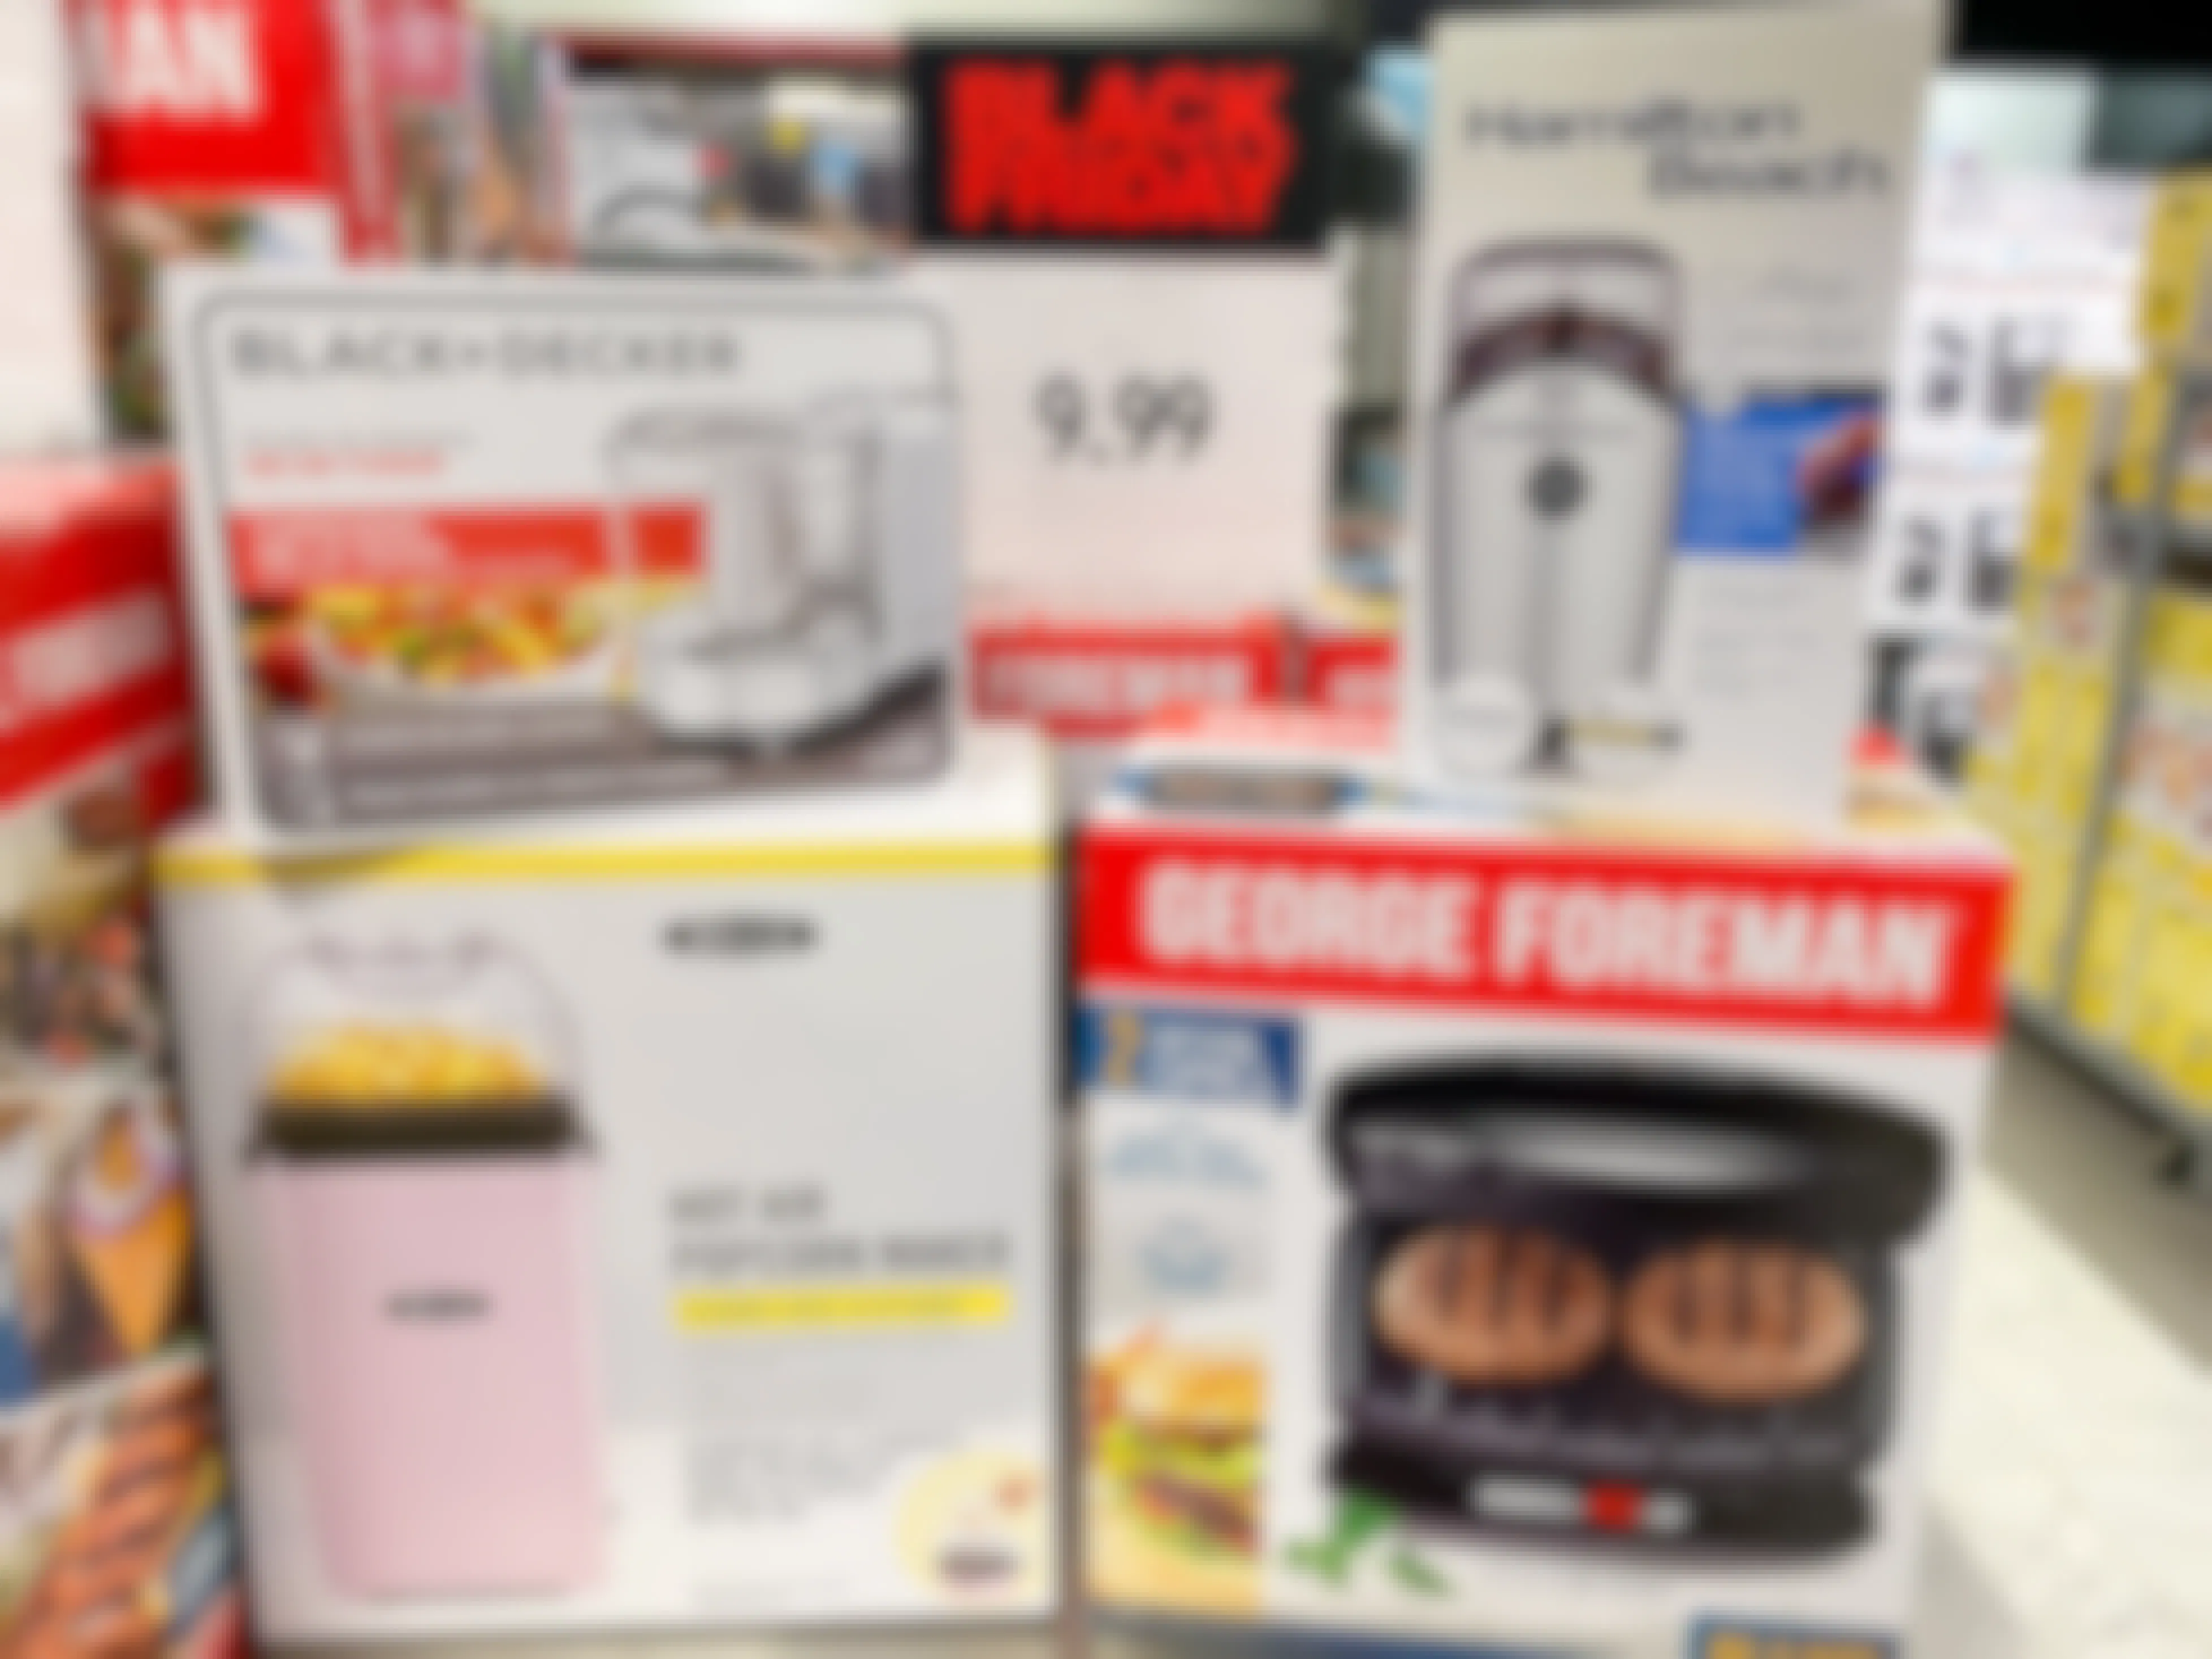 Small appliances from Black+Decker, Hamilton Beach, Bella, and George Foreman sitting on a Black Friday sale display inside Macy's.